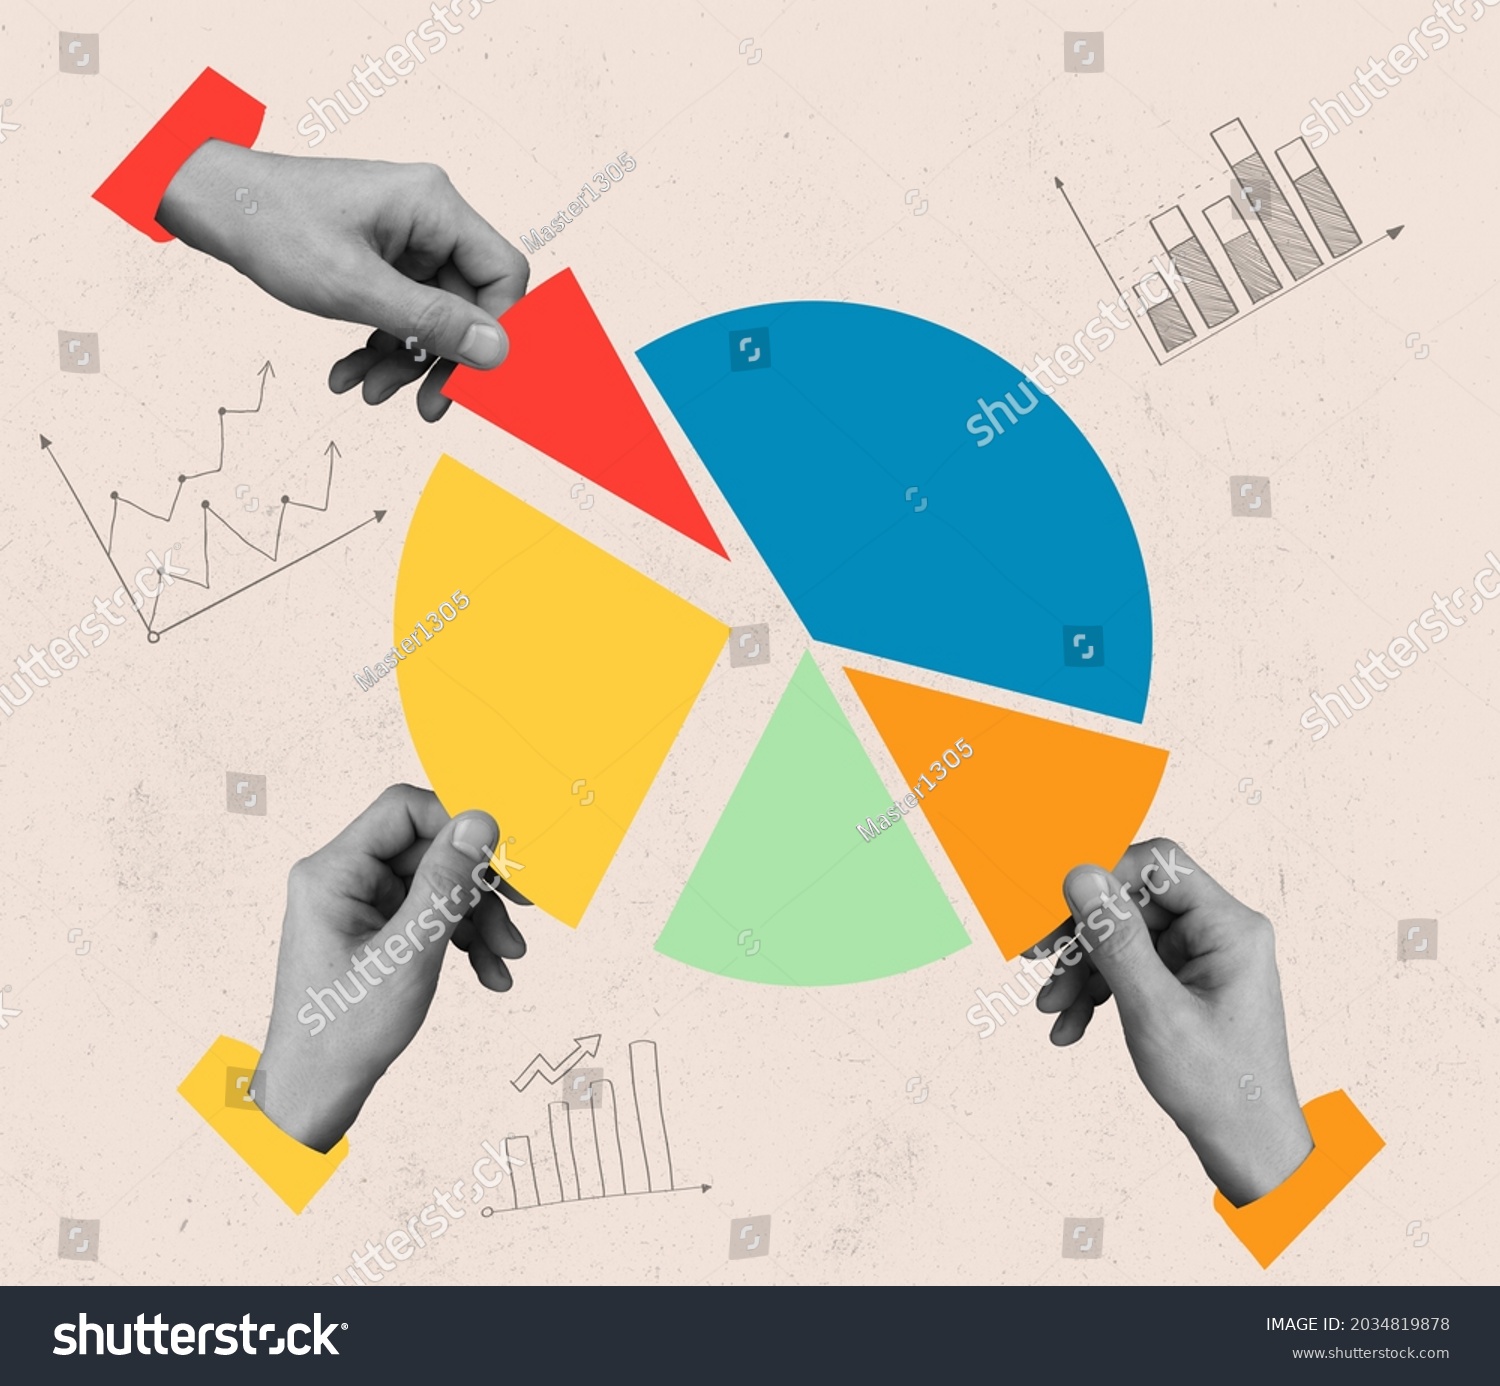 Goals, objectives, plans. Human hands control, taking pieces of muclticolored diagram isolated on light background. Contemporary art collage. Inspiration, idea. Concept of work, occupation, business #2034819878